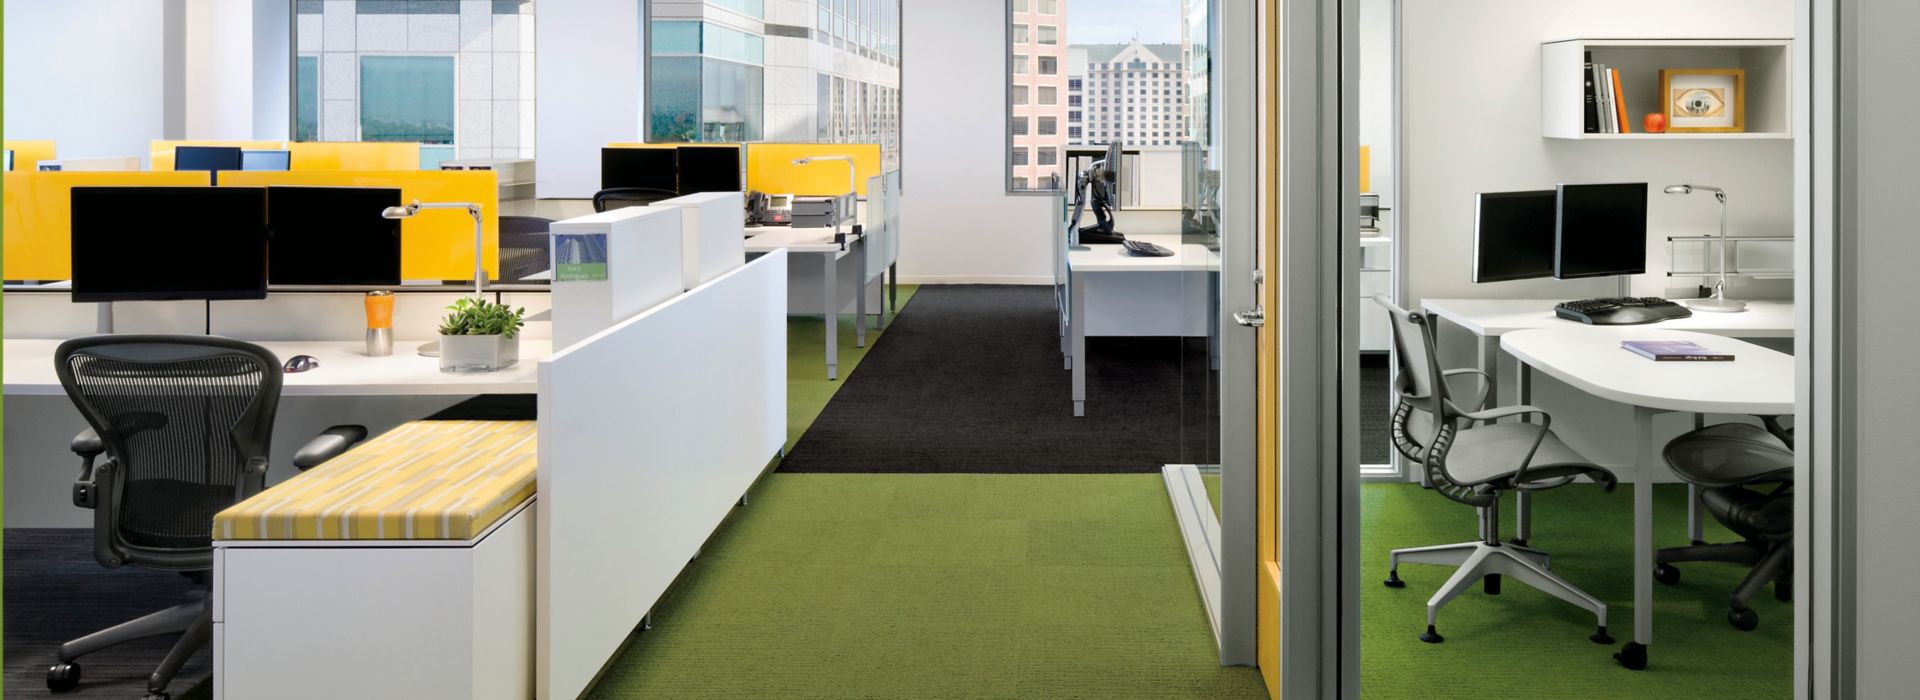 Interface Monochrome and Striation carpet tile in walkway of office with multiple open offices and a private office afbeeldingnummer 2